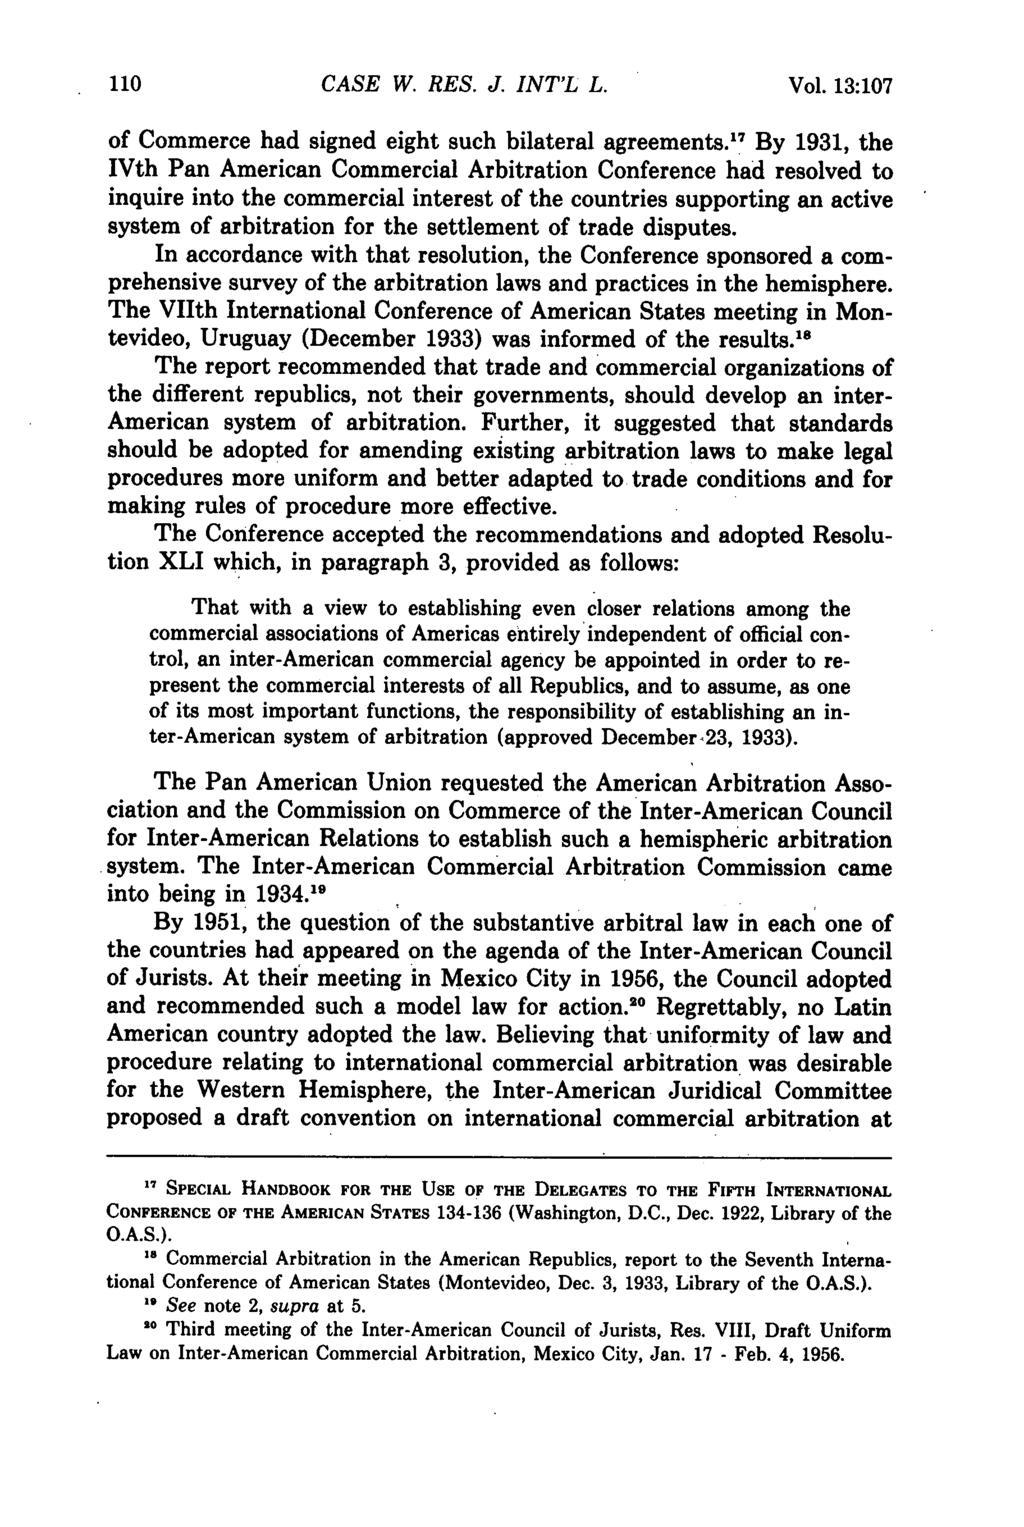 CASE W. RES. J. INT'L L. Vol. 13:107 of Commerce had signed eight such bilateral agreements.